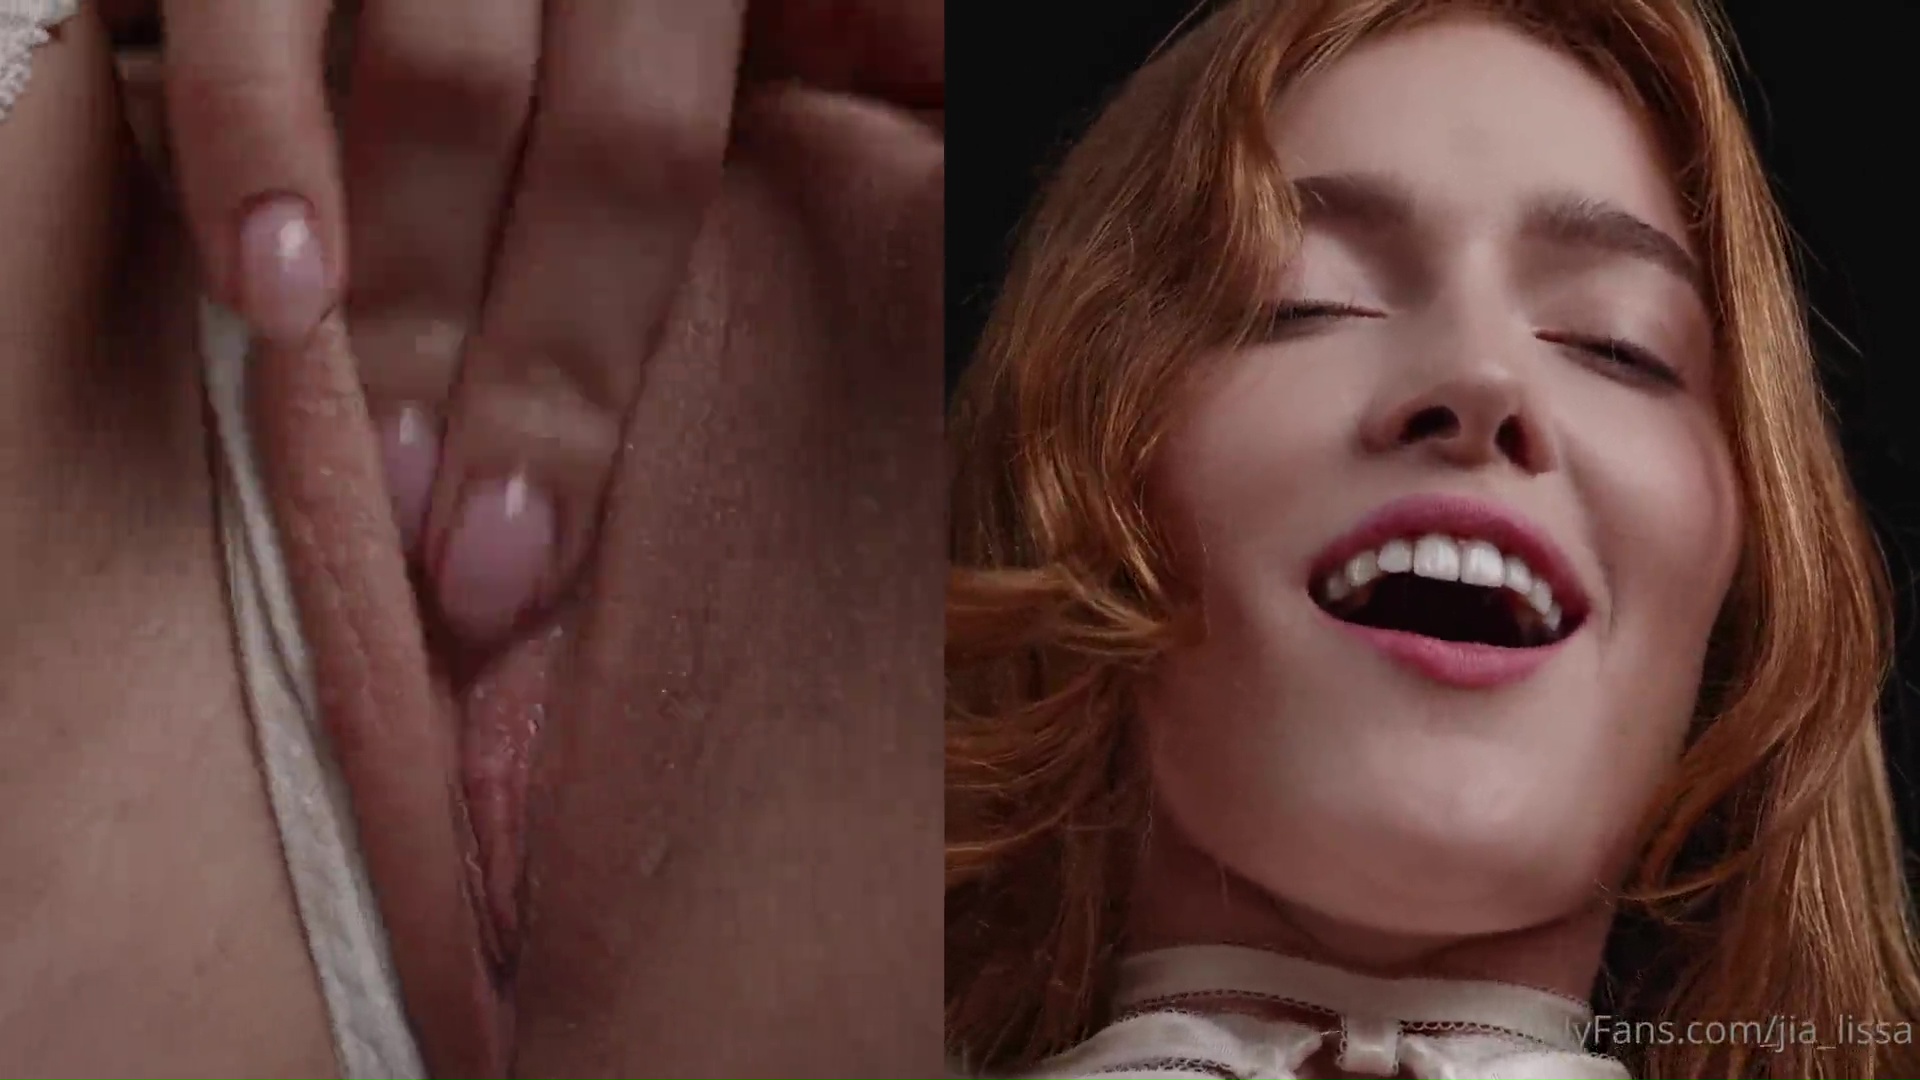 Jia Lissa Close Up Dildo Fucking Pussy Video Leaked - gotanynudes.com